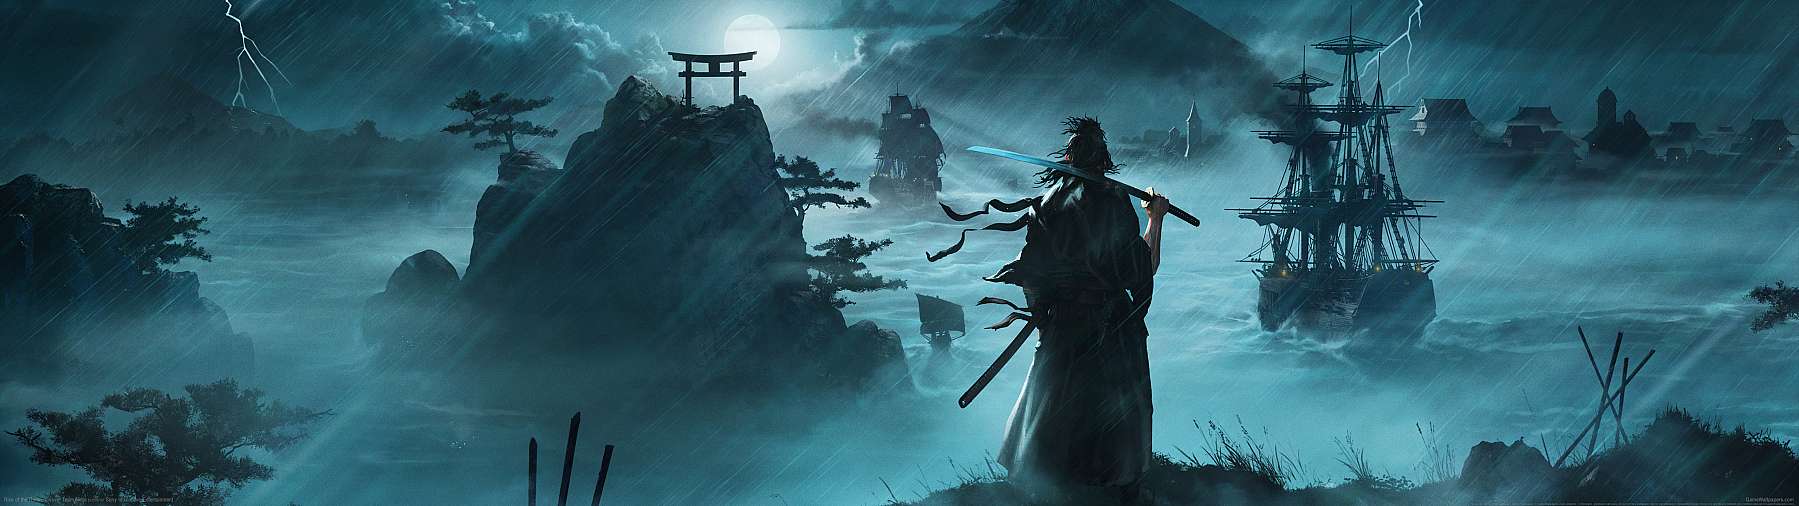 Rise of the Ronin superwide achtergrond 01